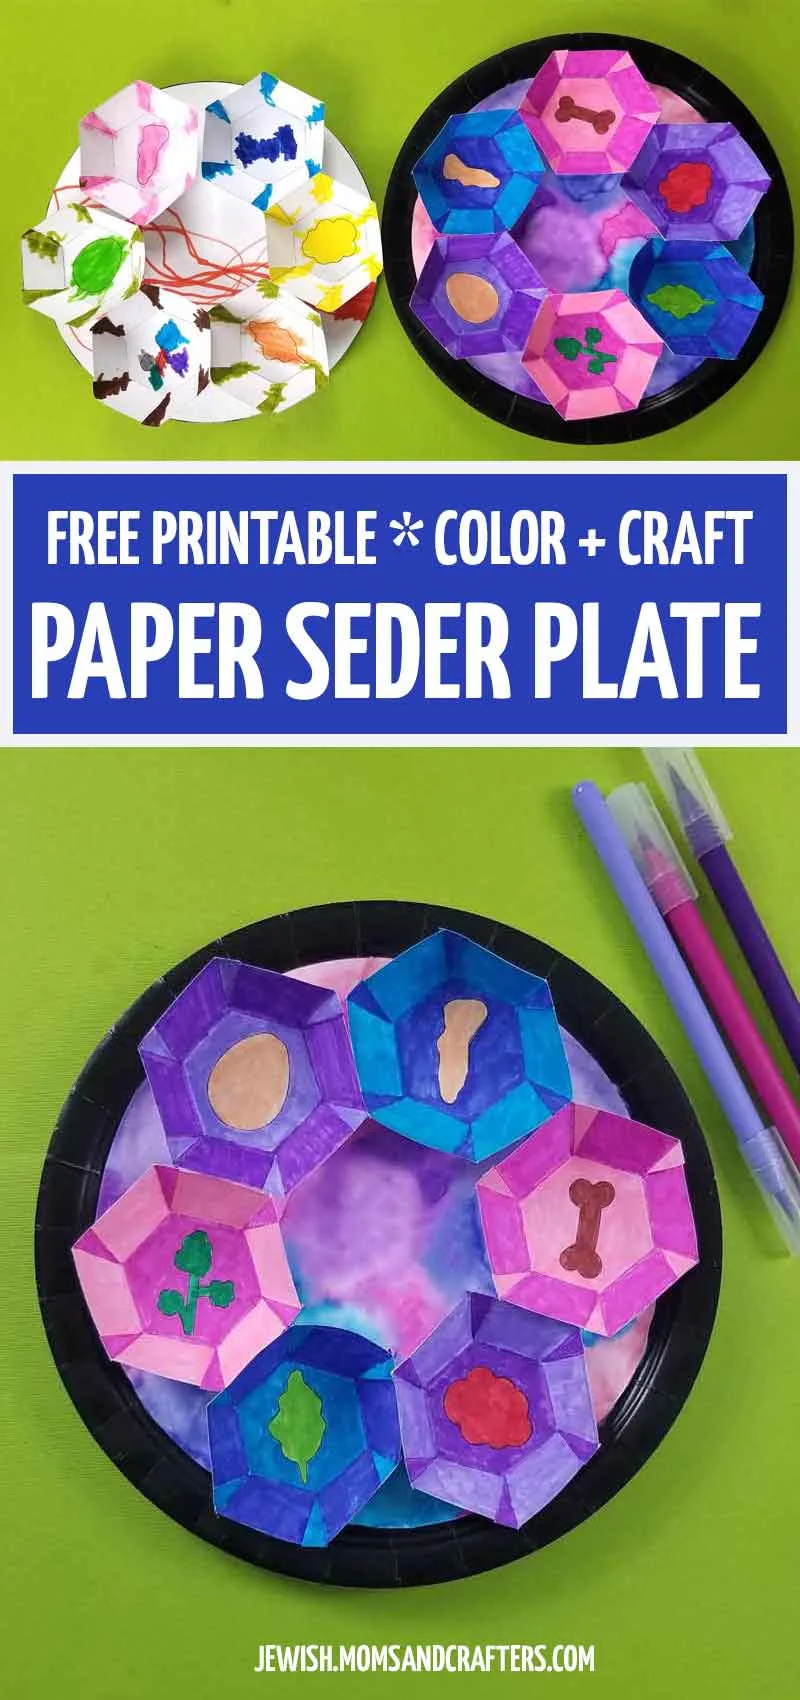 Click to download and print this template to make a paper seder plate for kids - a cool passover or pesach craft idea for preschool, toddlers, and kids - even for tweens!